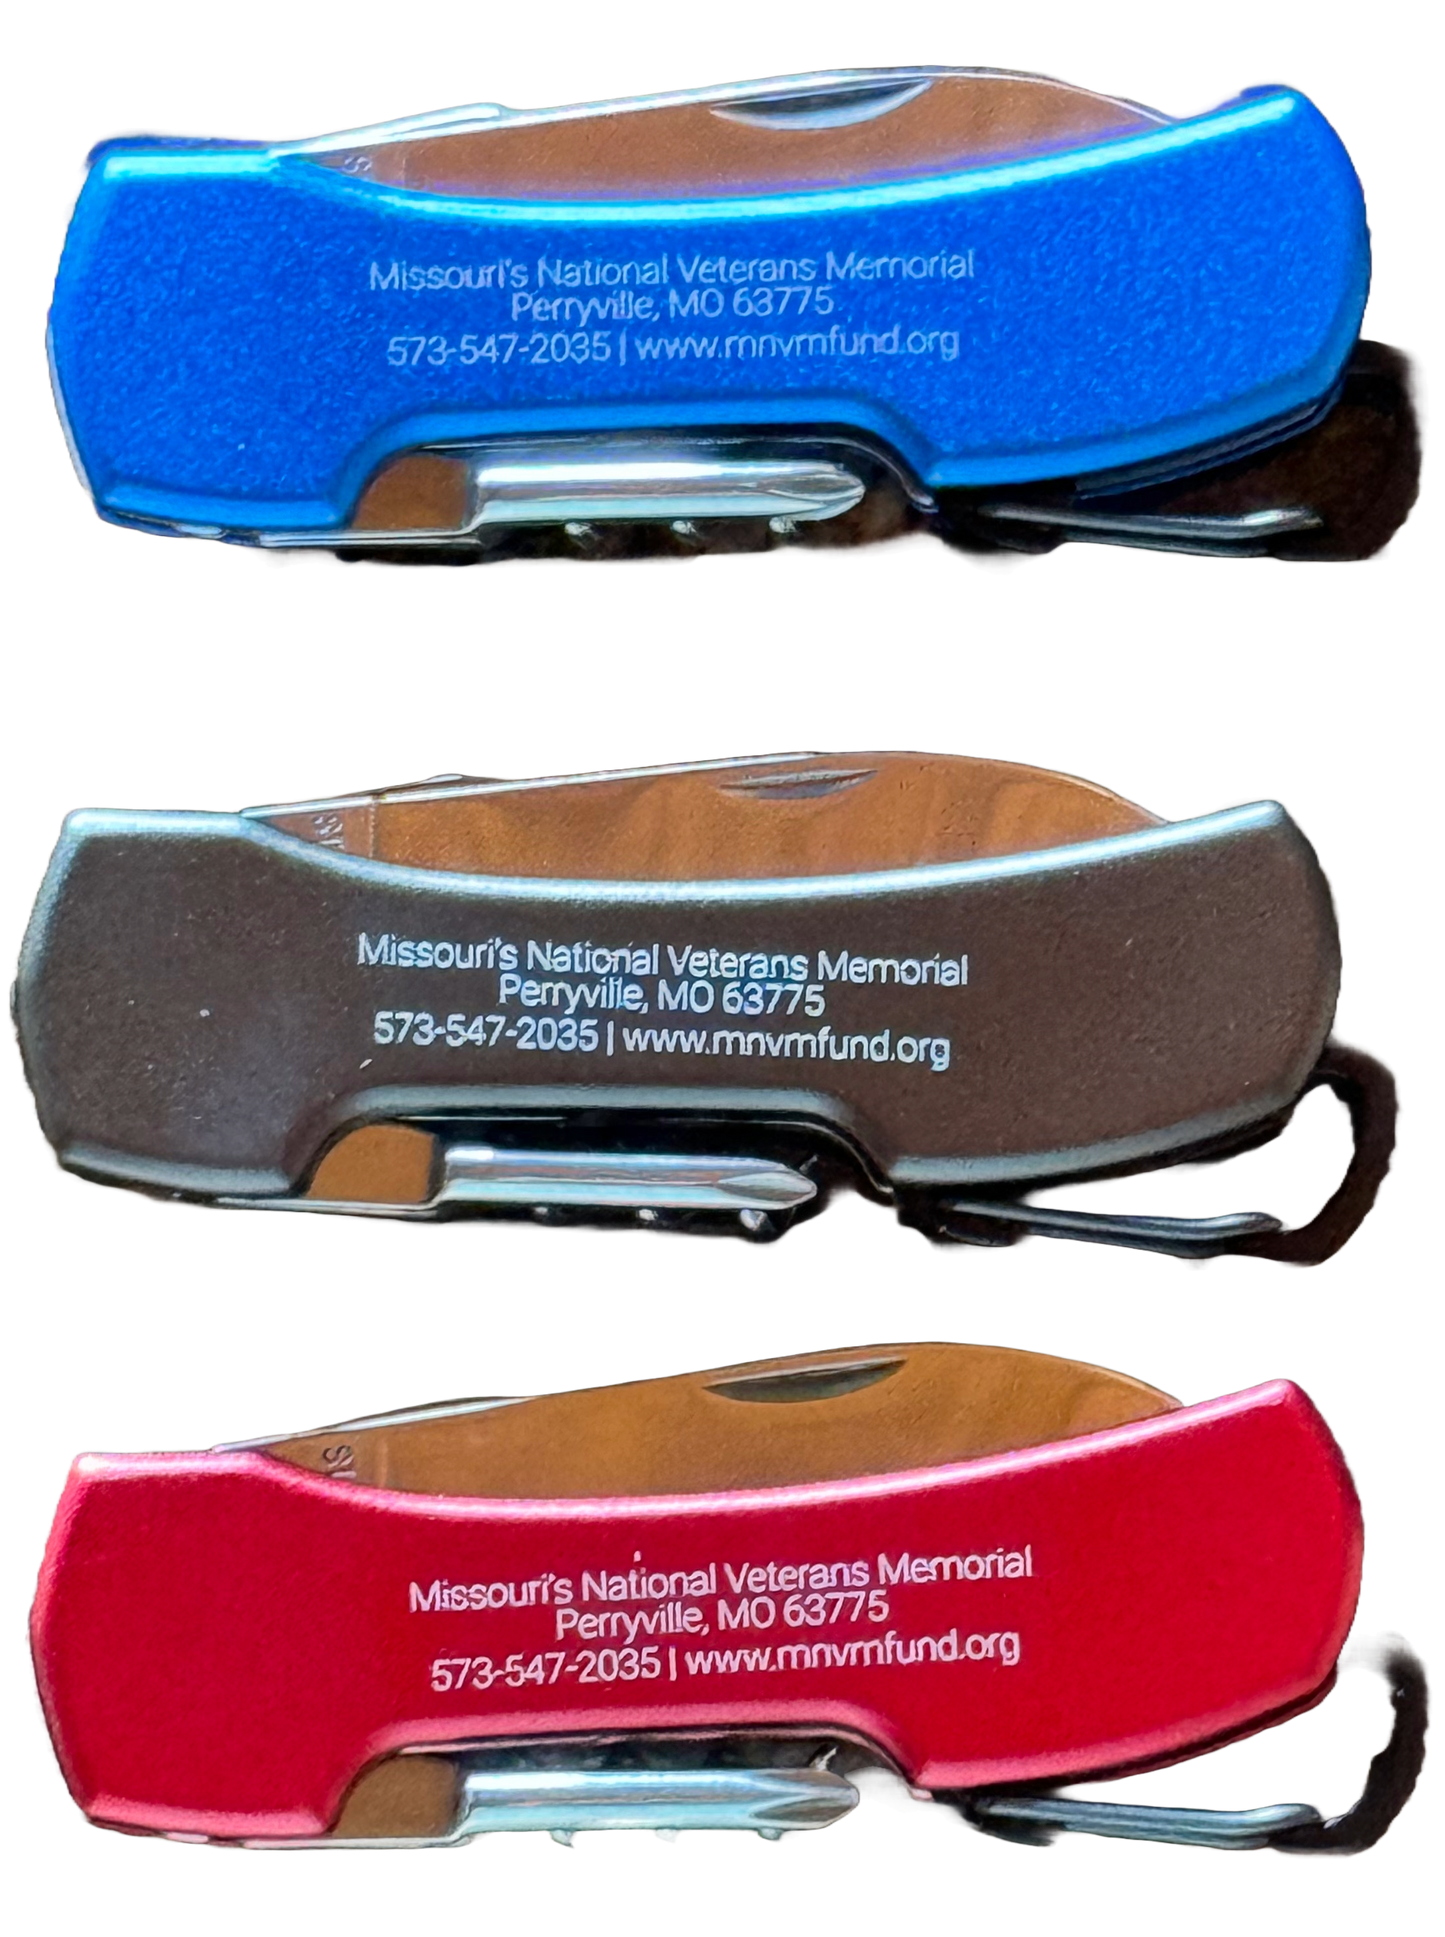 5-in-1 Knife with Carabiner Clip. Photo includes black, blue, and red knife. Each knife says Missouri's National Veterans Memorial, phone number, and website